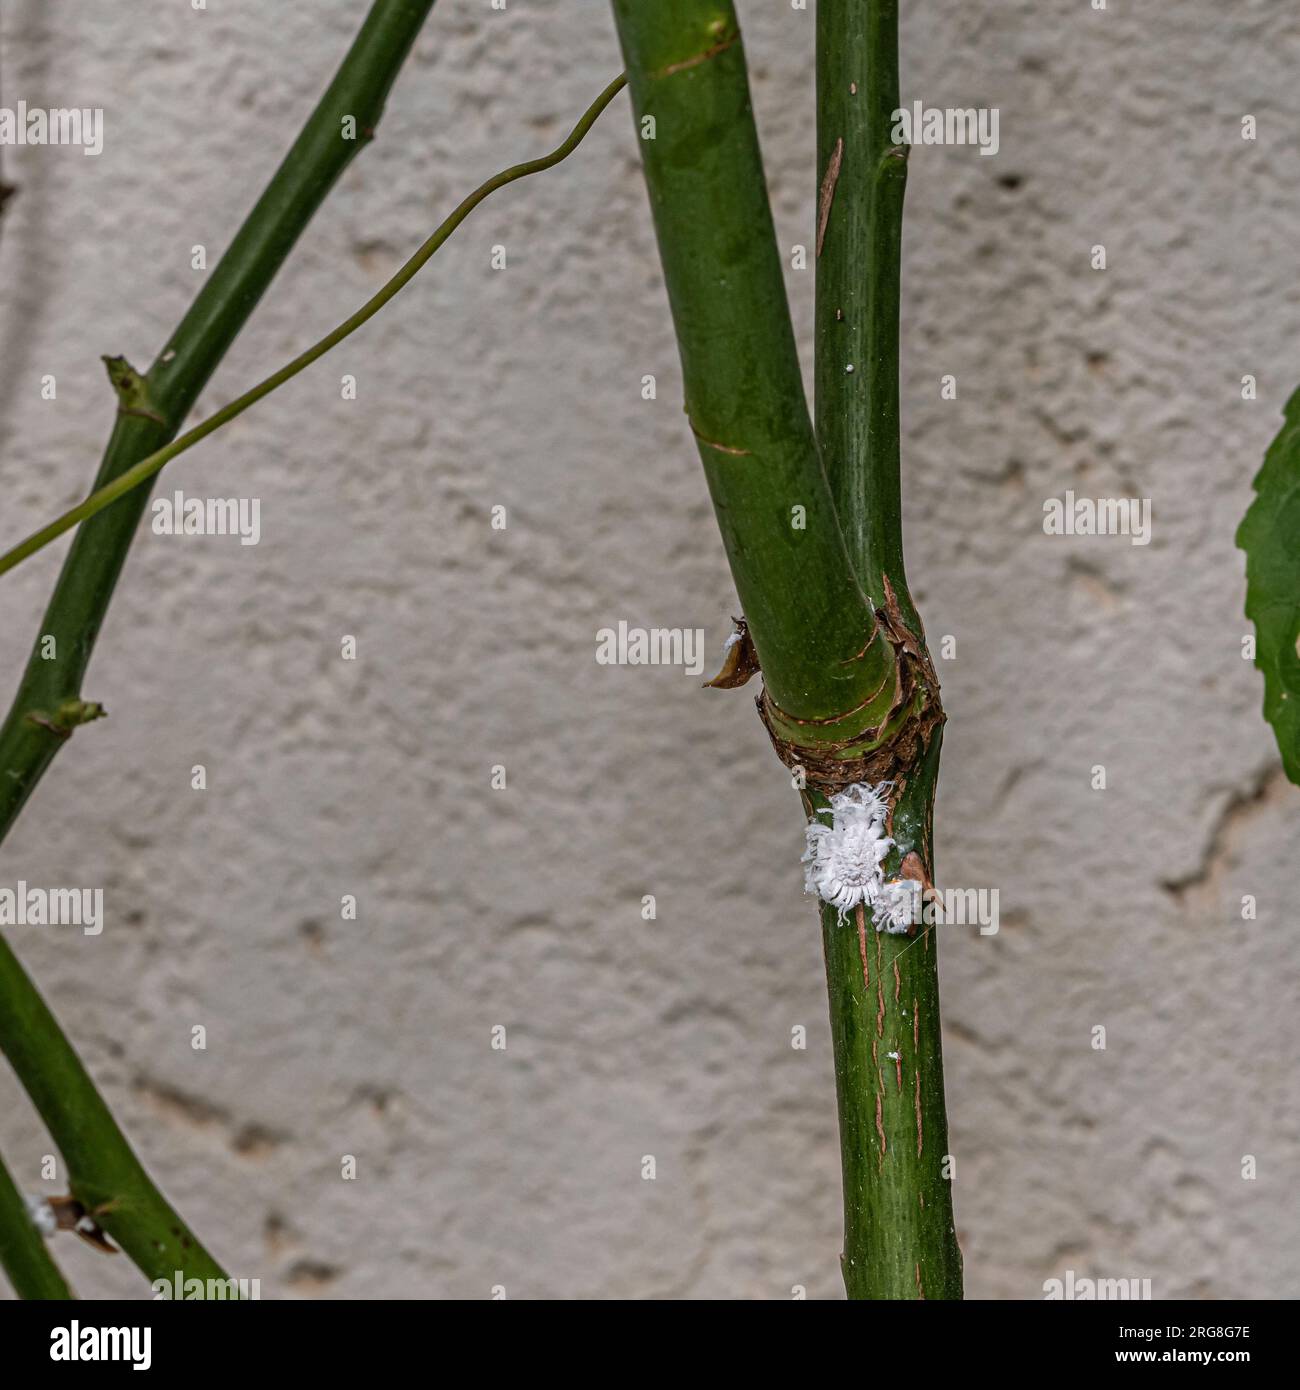 Mealy bugs on a rose stem and leaf. Cluster of mealy bugs (Icerya aegyptiaca ). on the underside of a rose leaf Photographed in Israel in June Stock Photo